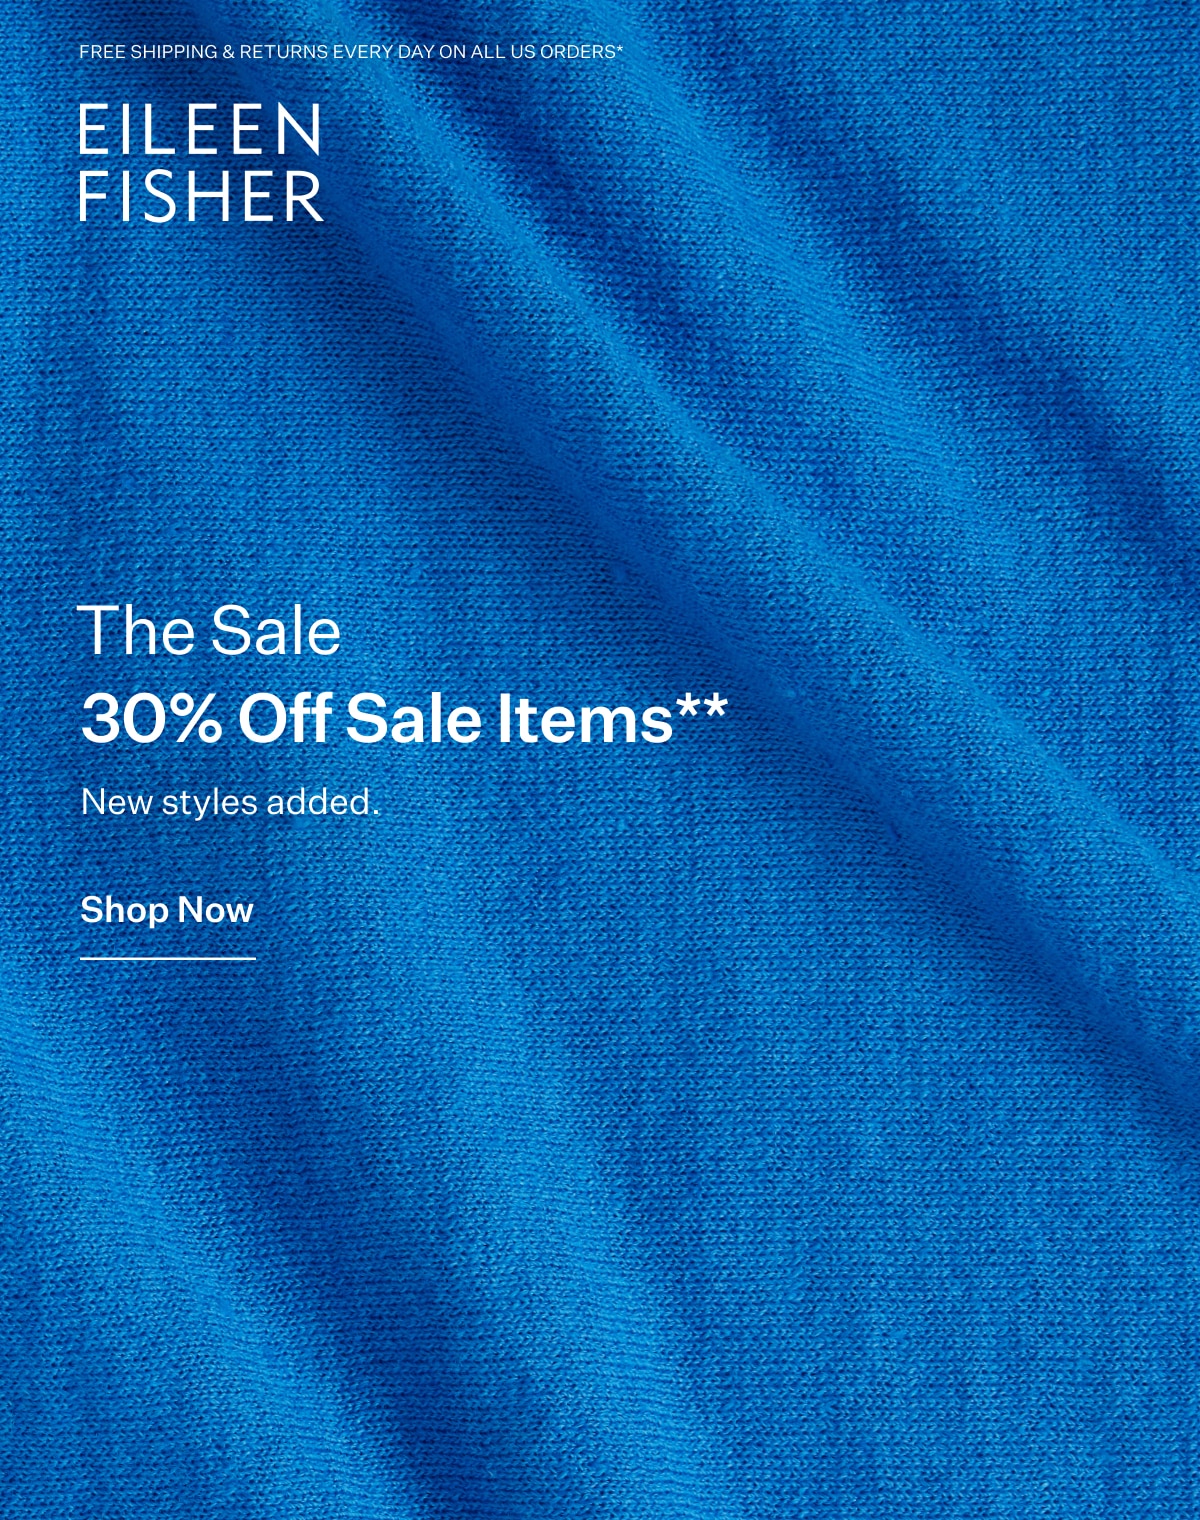 EILEEN FISHER - The Sale. 30% Off Sale Items**. New styles added. Shop Now.